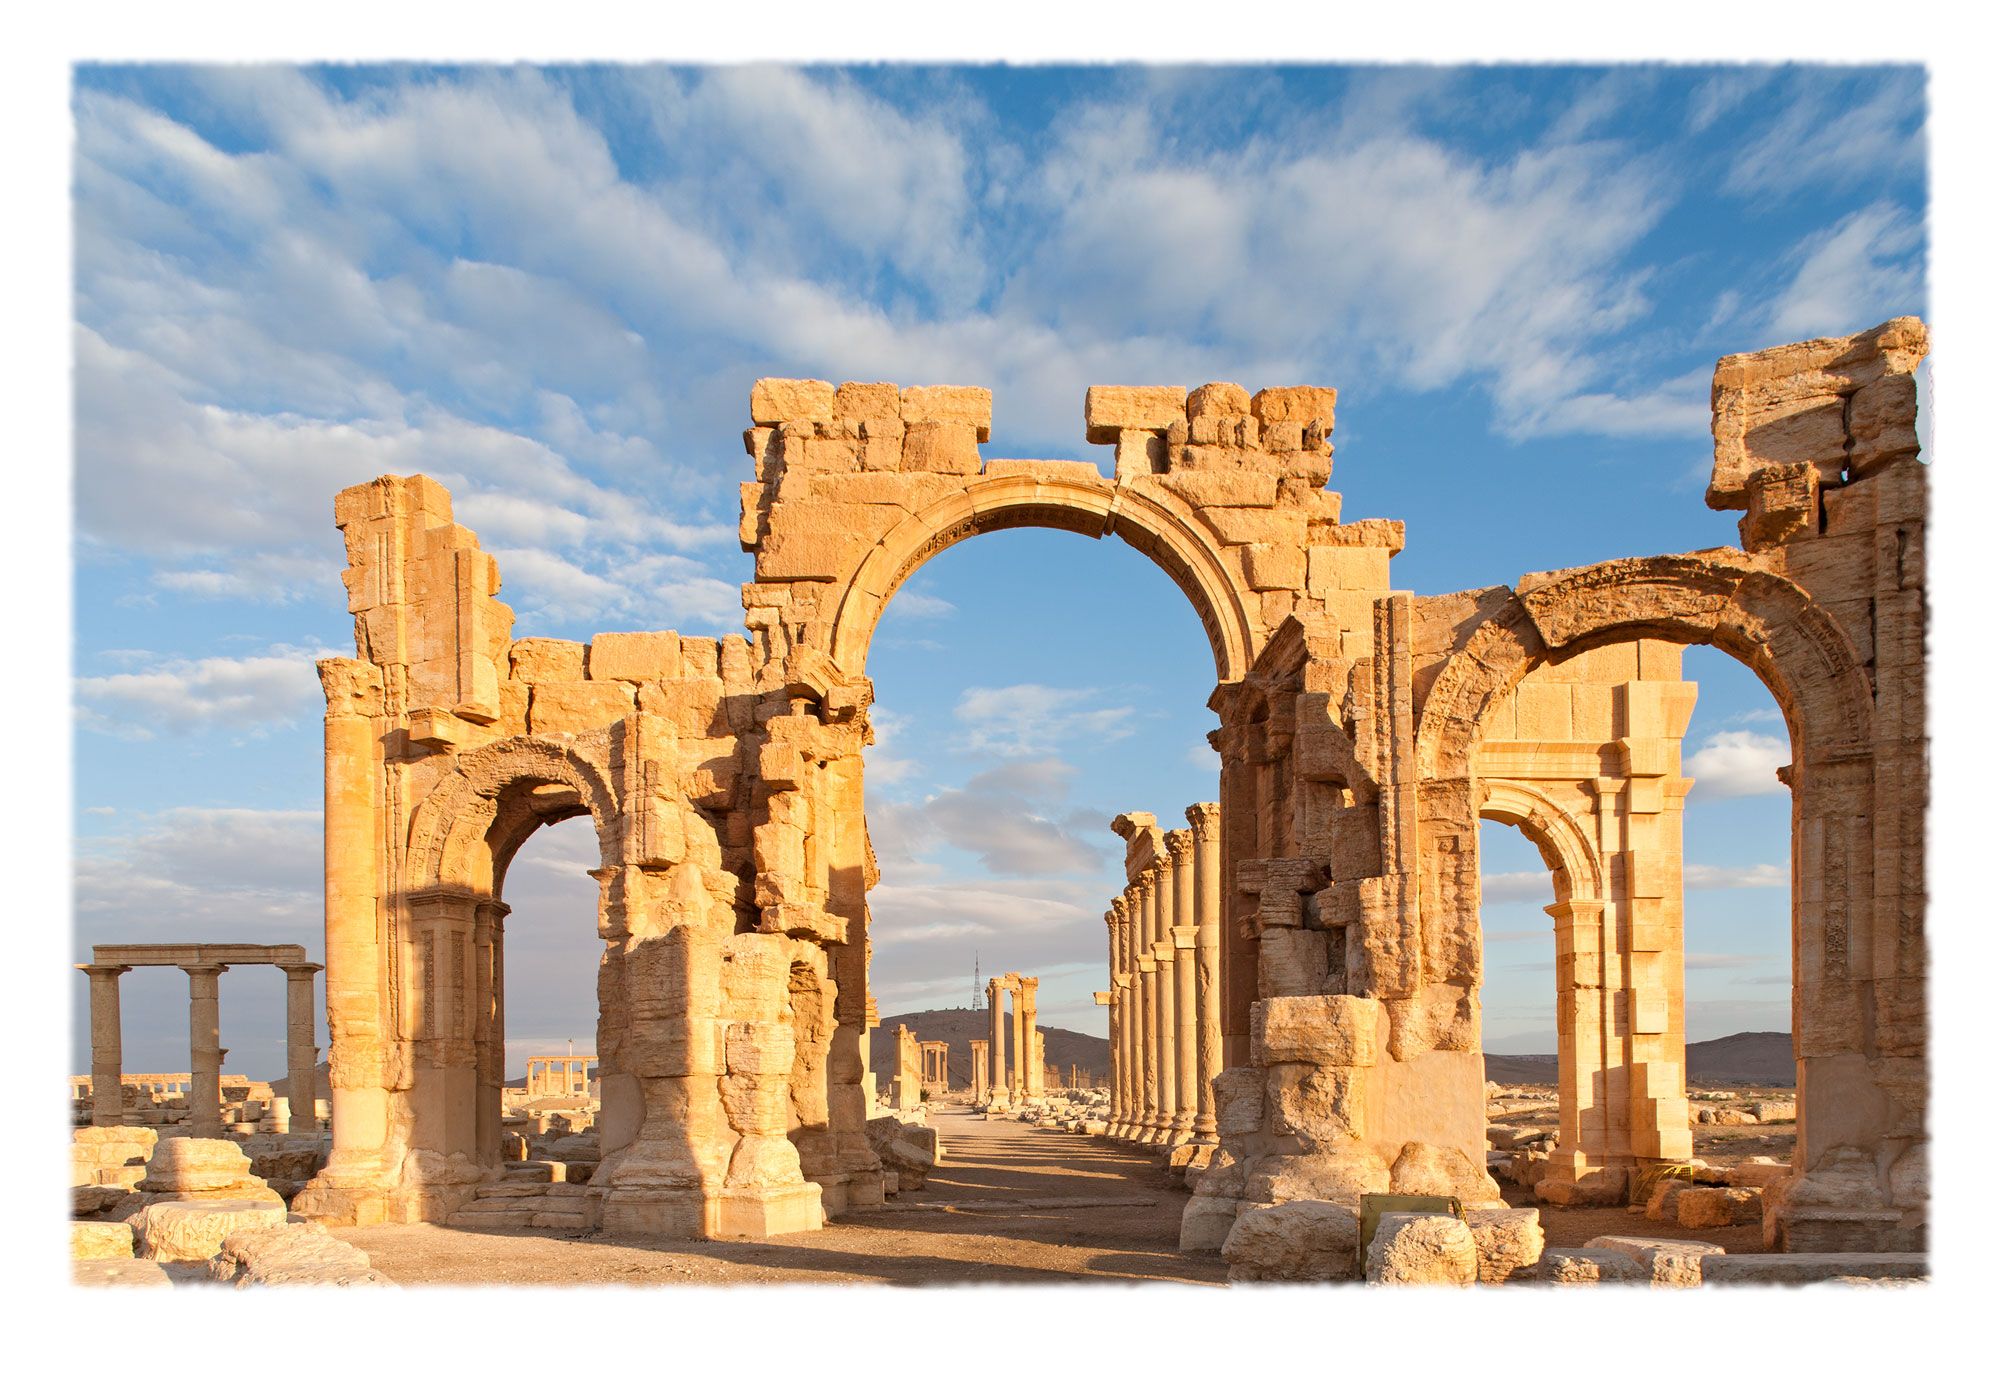 Qaws al-Nasr (in Arabic), a monumental arched entrance to the main colonnaded thoroughfare of ancient Palmyra. Built during the reign of emperor Septimius Severus [193 to 211 CE], it commemorated a Roman victory over the Parthians. It was exploded with dynamite in October 2015 by Daesh.